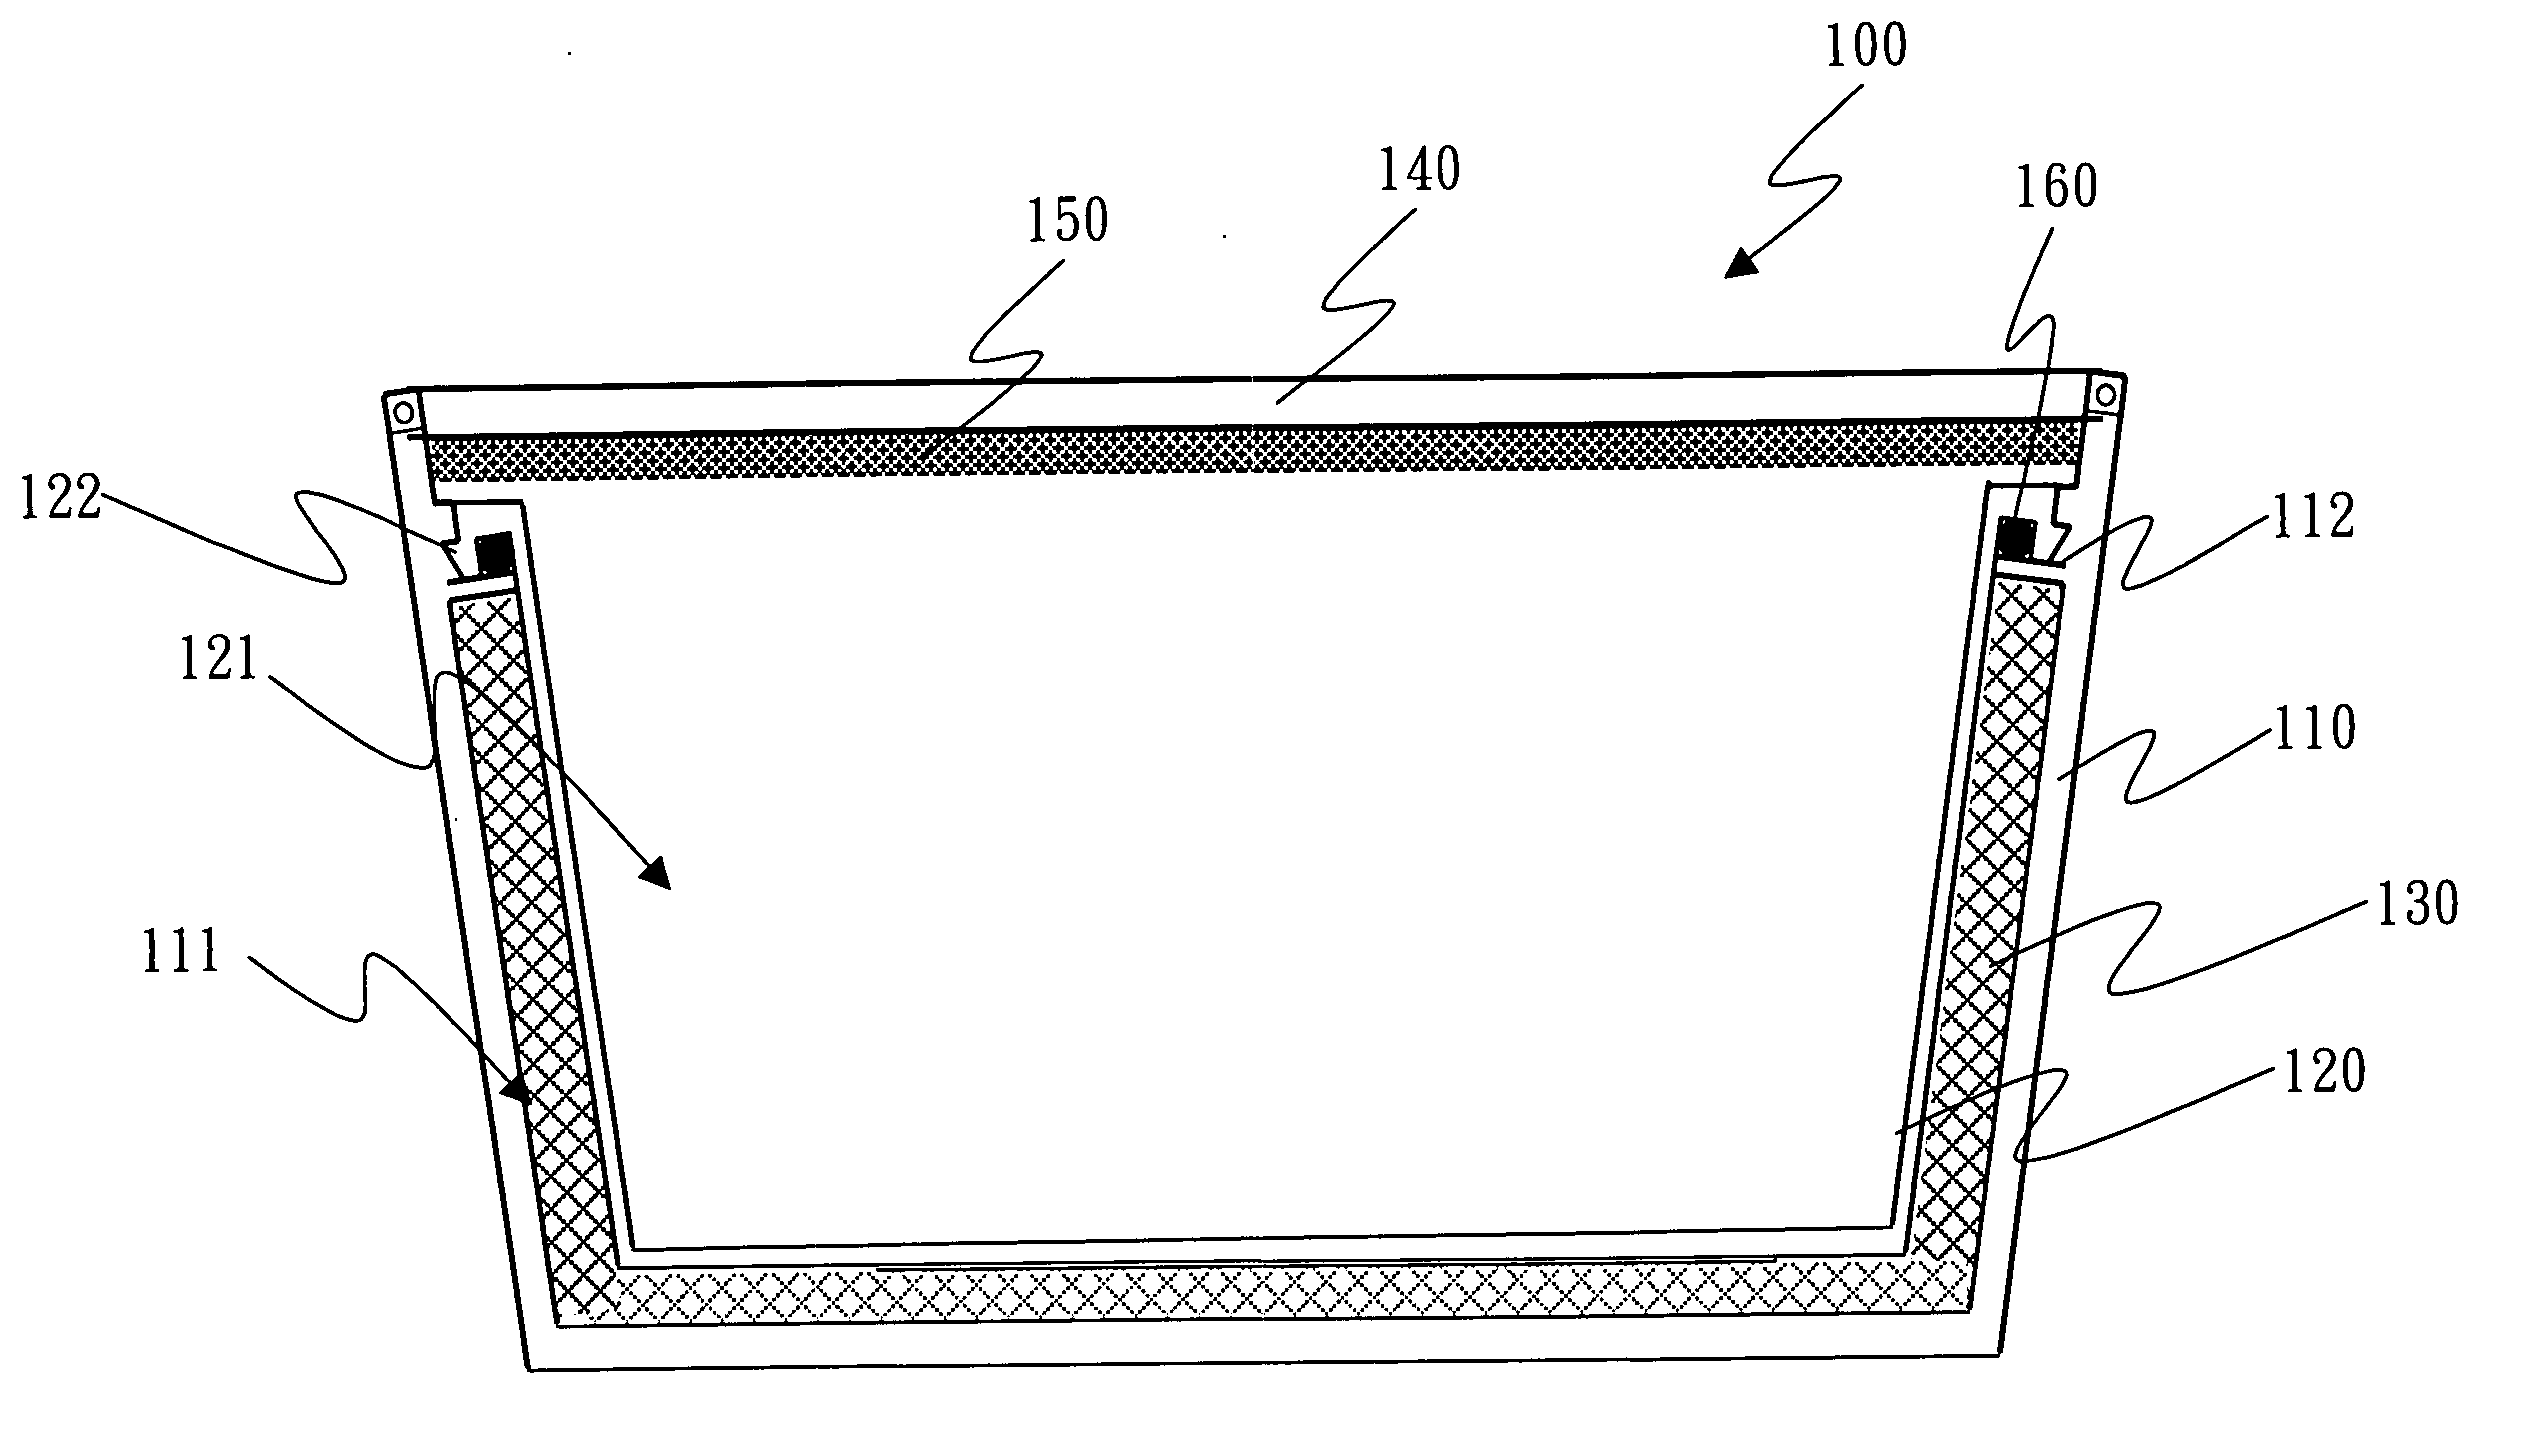 Insulated logistic container and delivery system using such insulated container